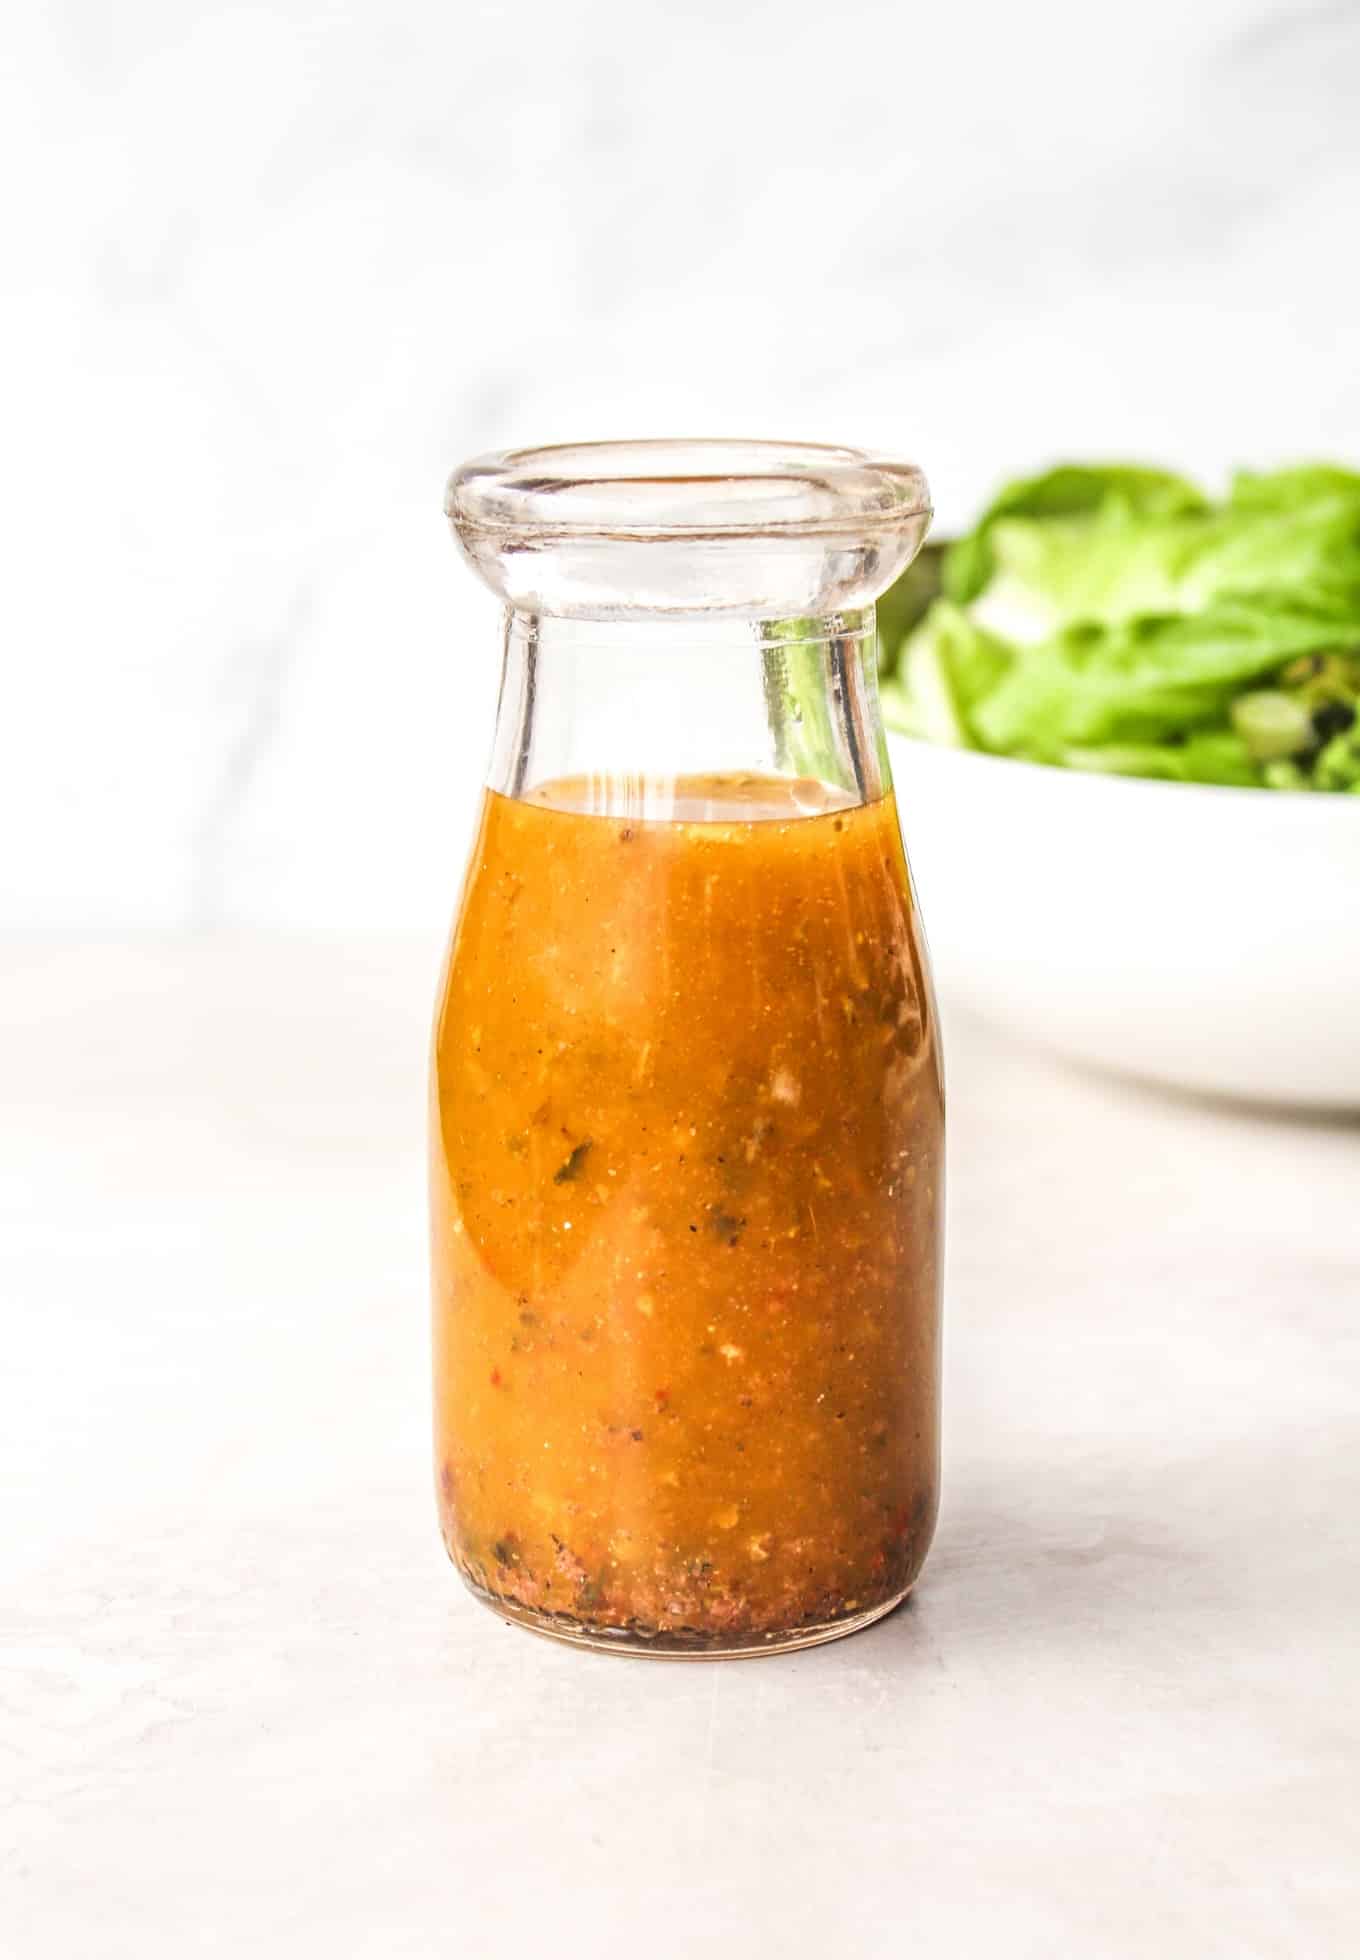 Love salad dressings and sauces? Watch out for hidden sugar in them